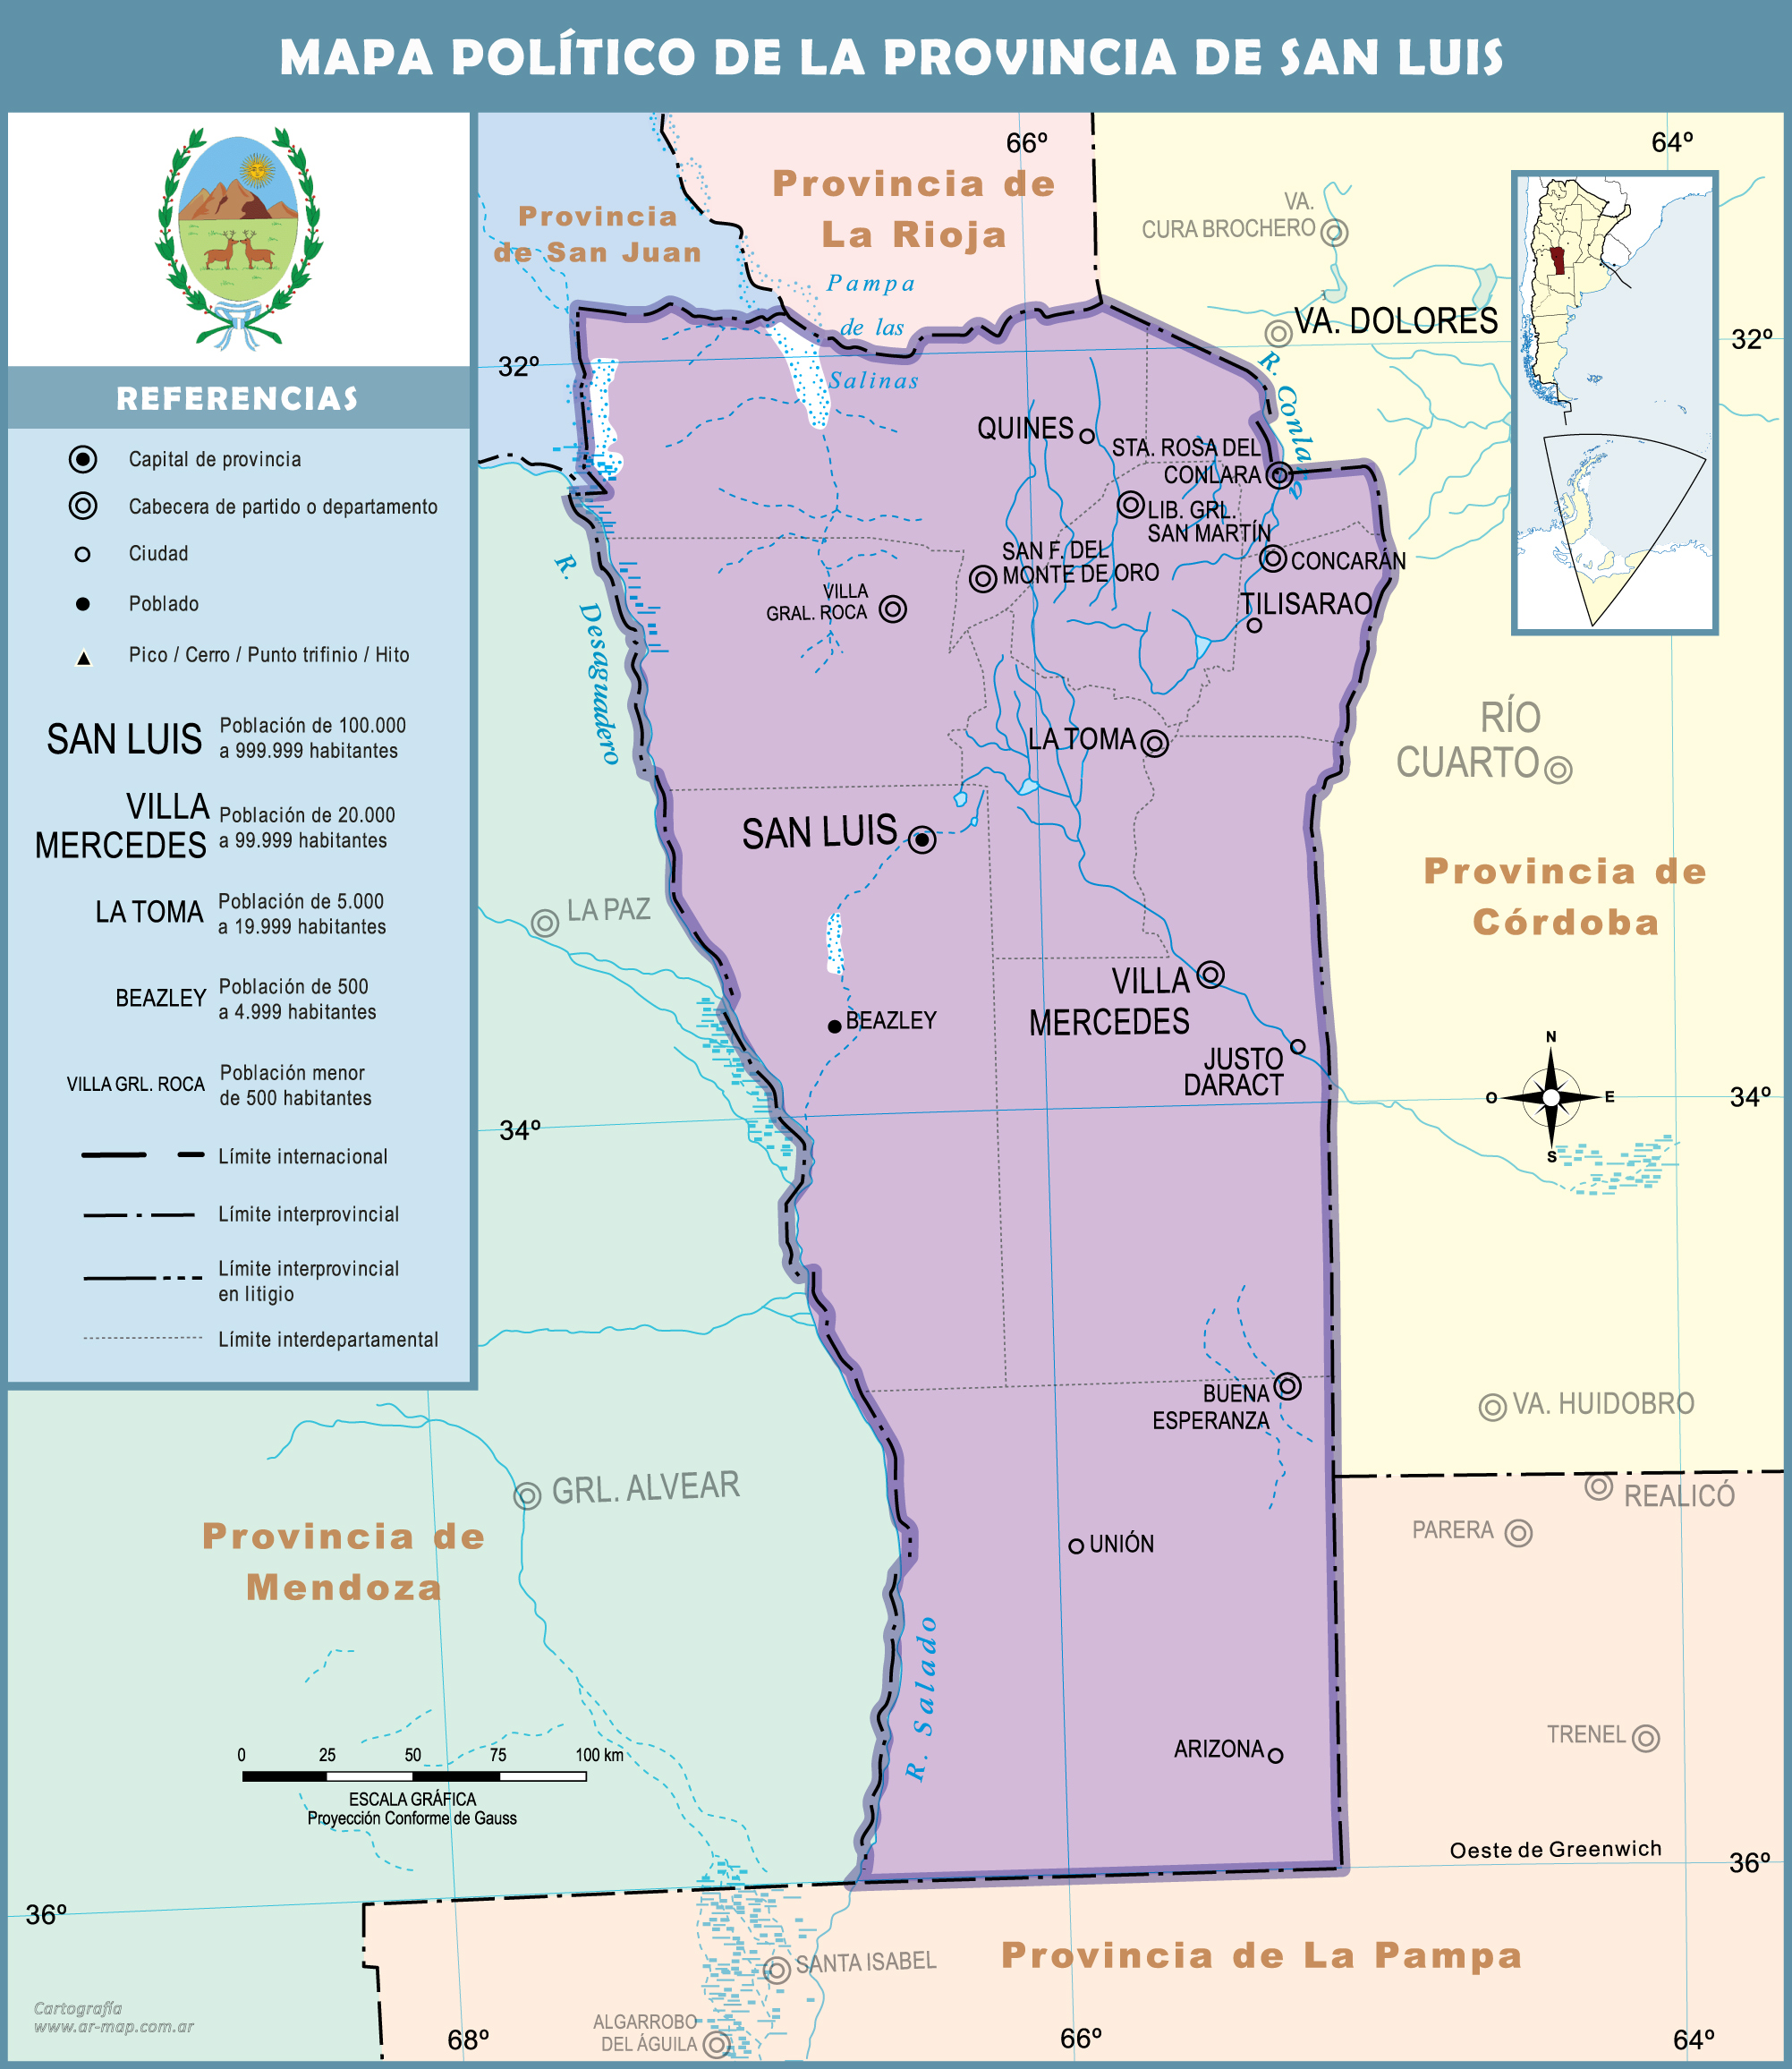 Political map of the Province of San Luis, Argentina | Gifex